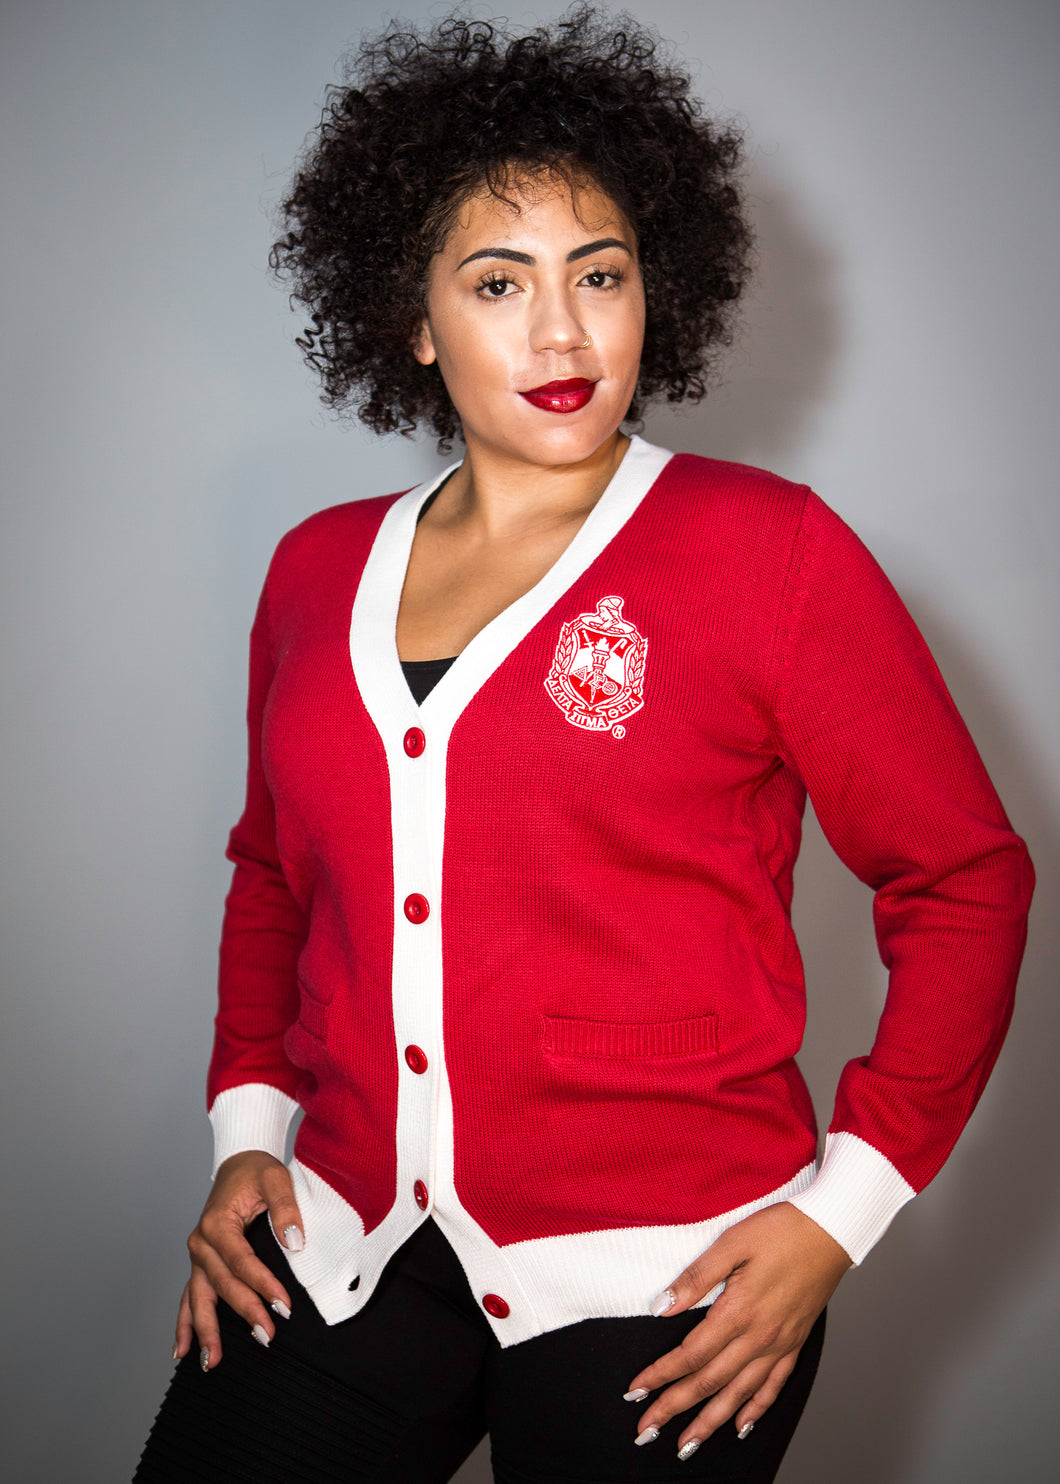 Classy Red Cardigan w/White Trim, Crest and Red Elbow Patches